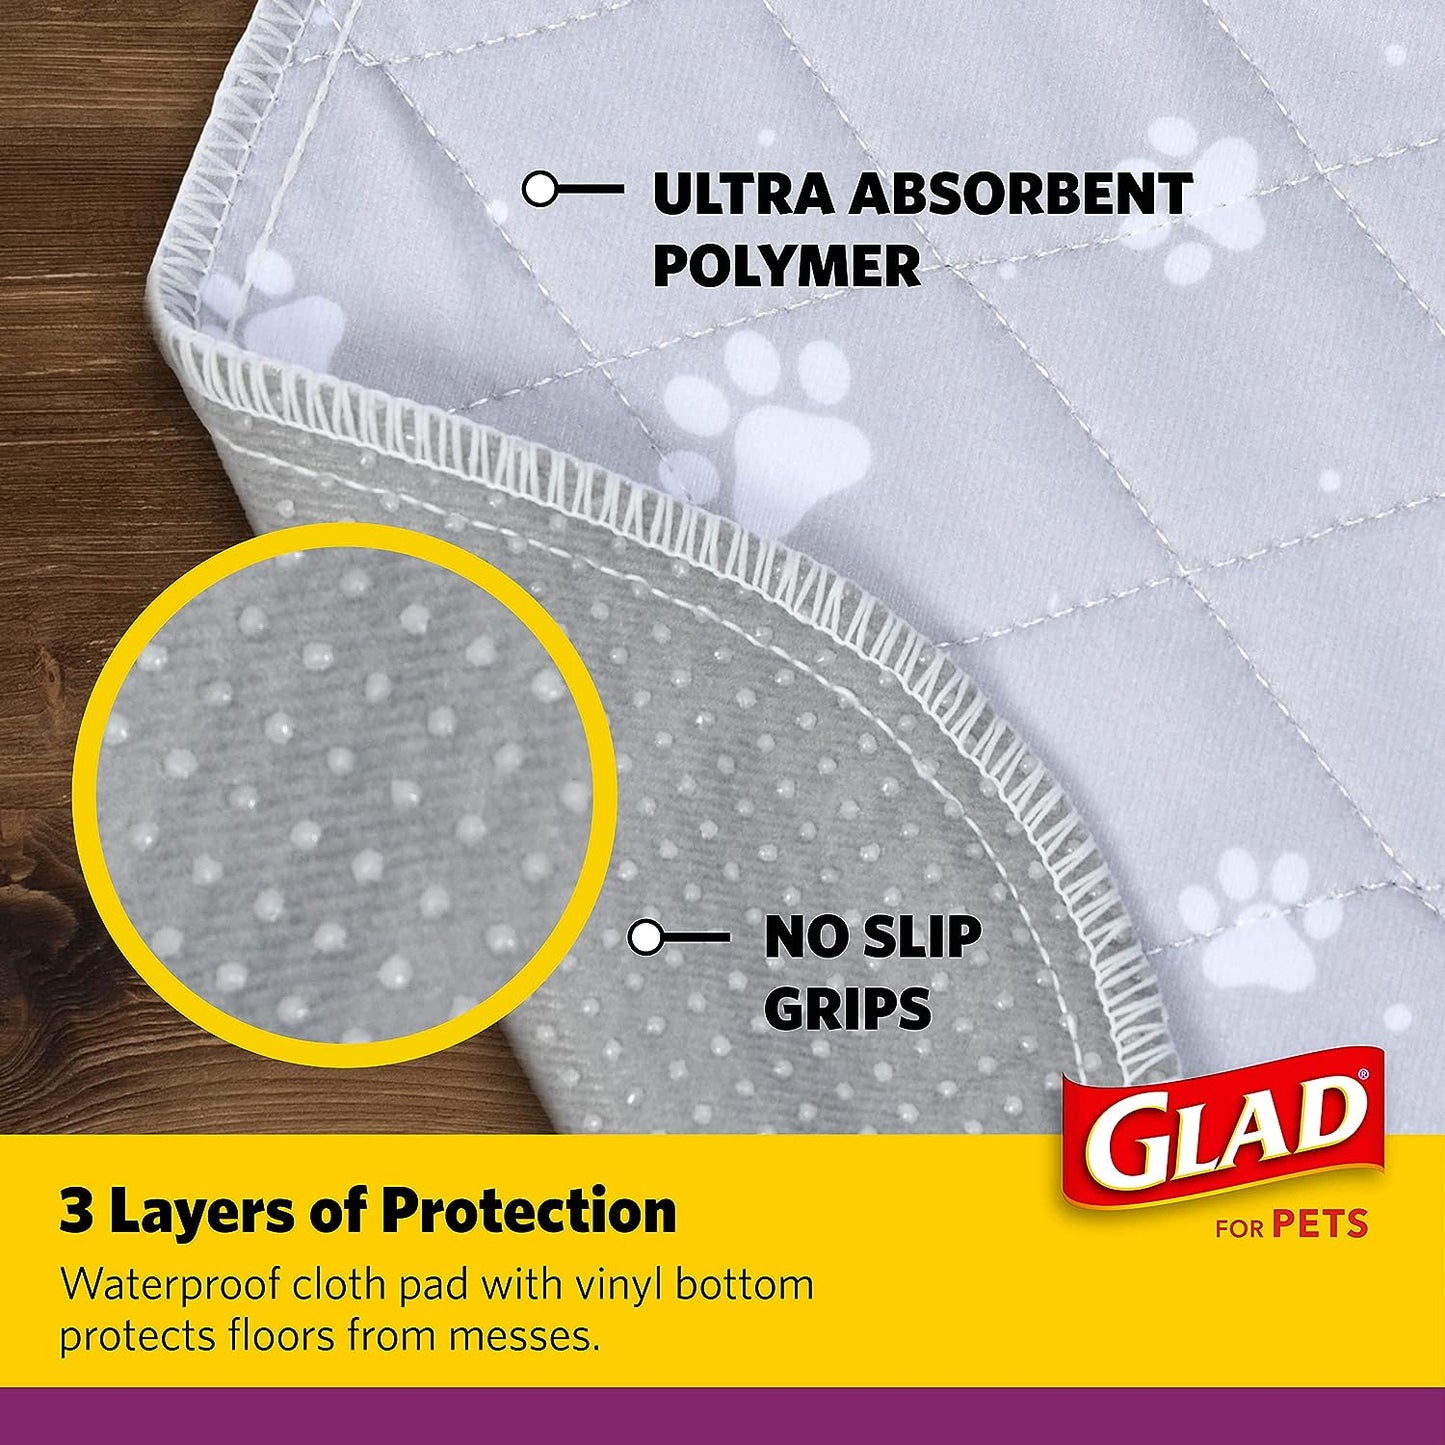 Glad for Pets Washable Training Pads, Medium Size (24”x36”), 2 Pack Gray with Paw Prints| Re-usable Cloth Dog Training Pads with 3 Layers of Leak Protection and No Slip Grip Vinyl Bottom